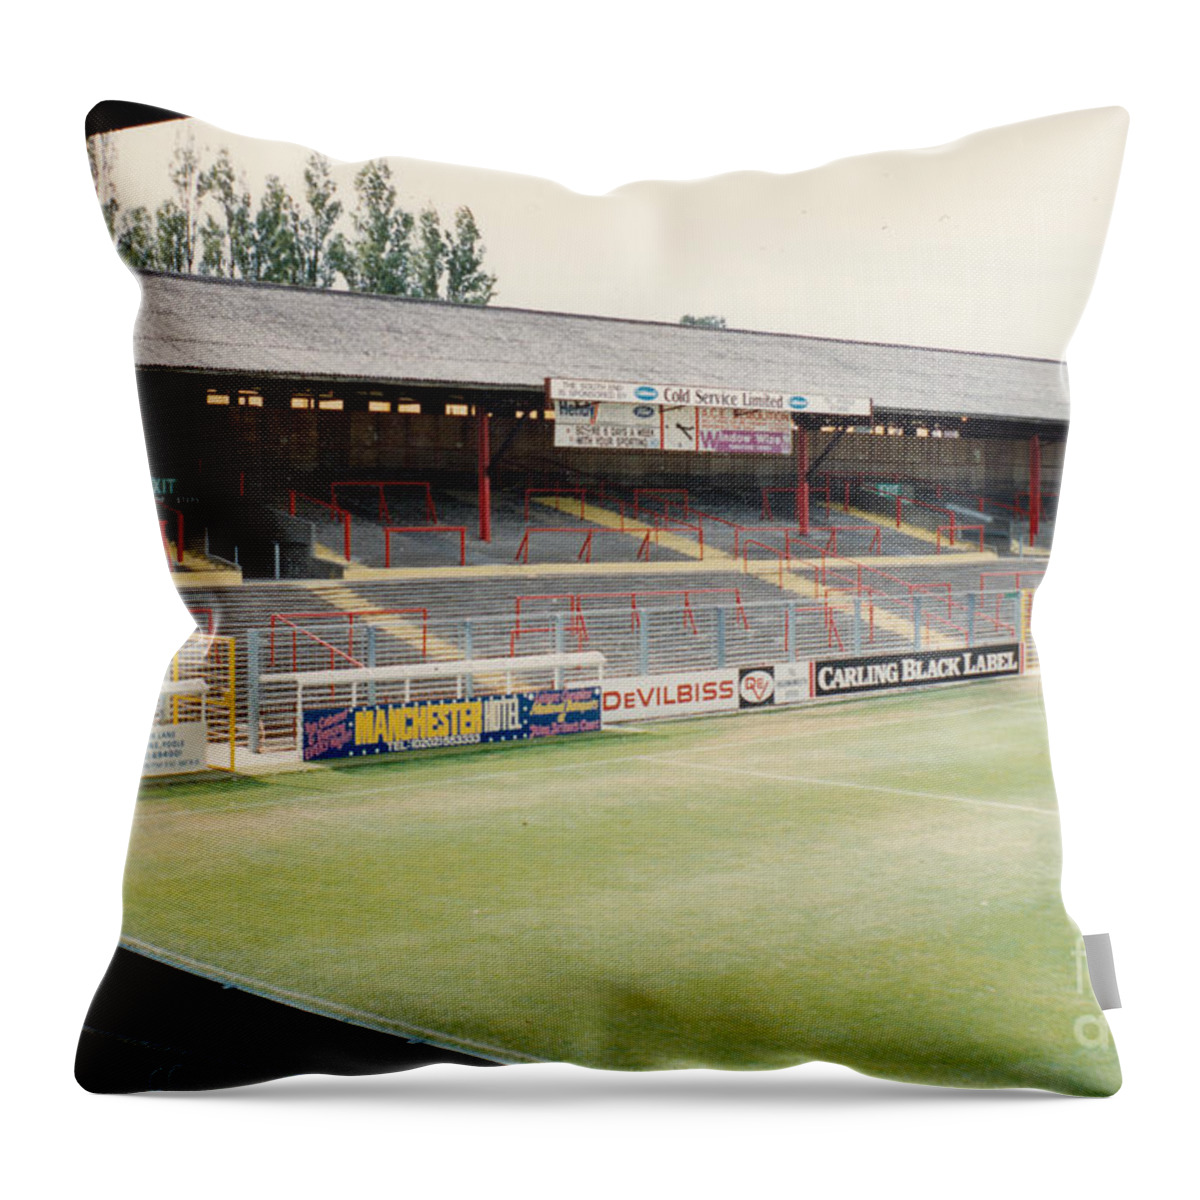 Afc Bournemouth Throw Pillow featuring the photograph AFC Bournemouth - Dean Court - SW Goal Terrace 1 - September 1990 by Legendary Football Grounds